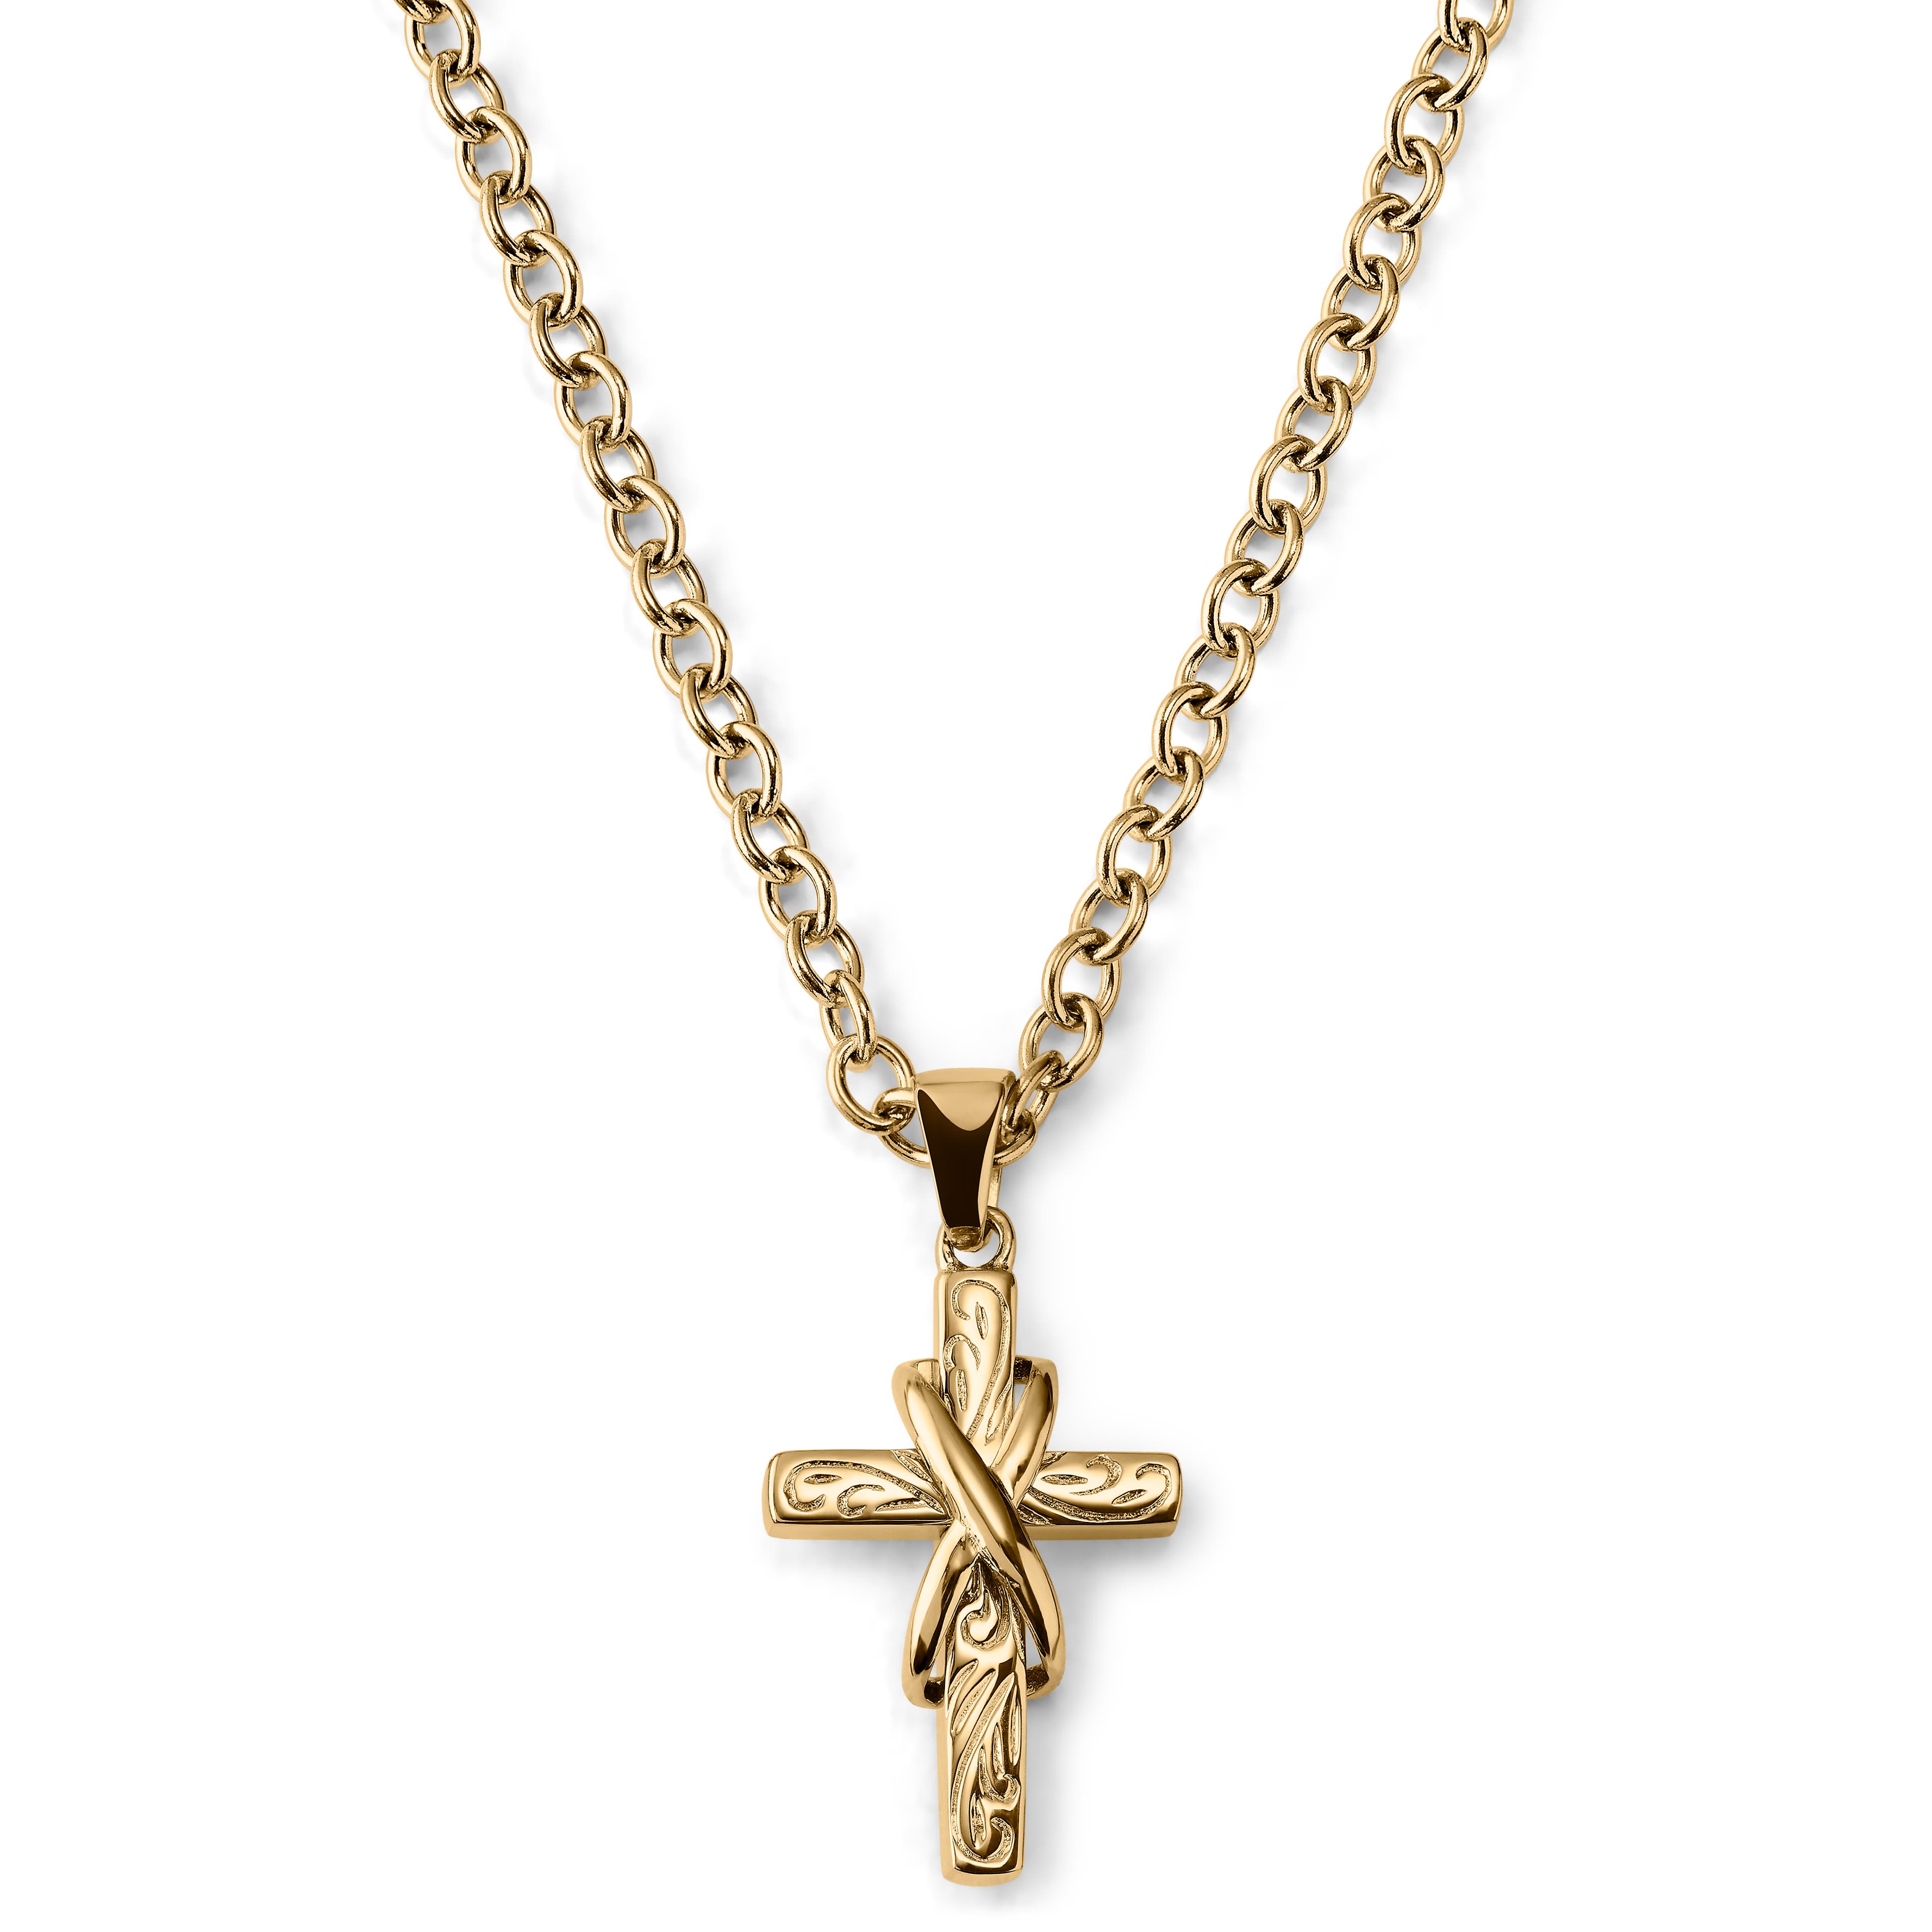 Gold-Tone With Cross & Infinity Symbol Cable Chain Necklace